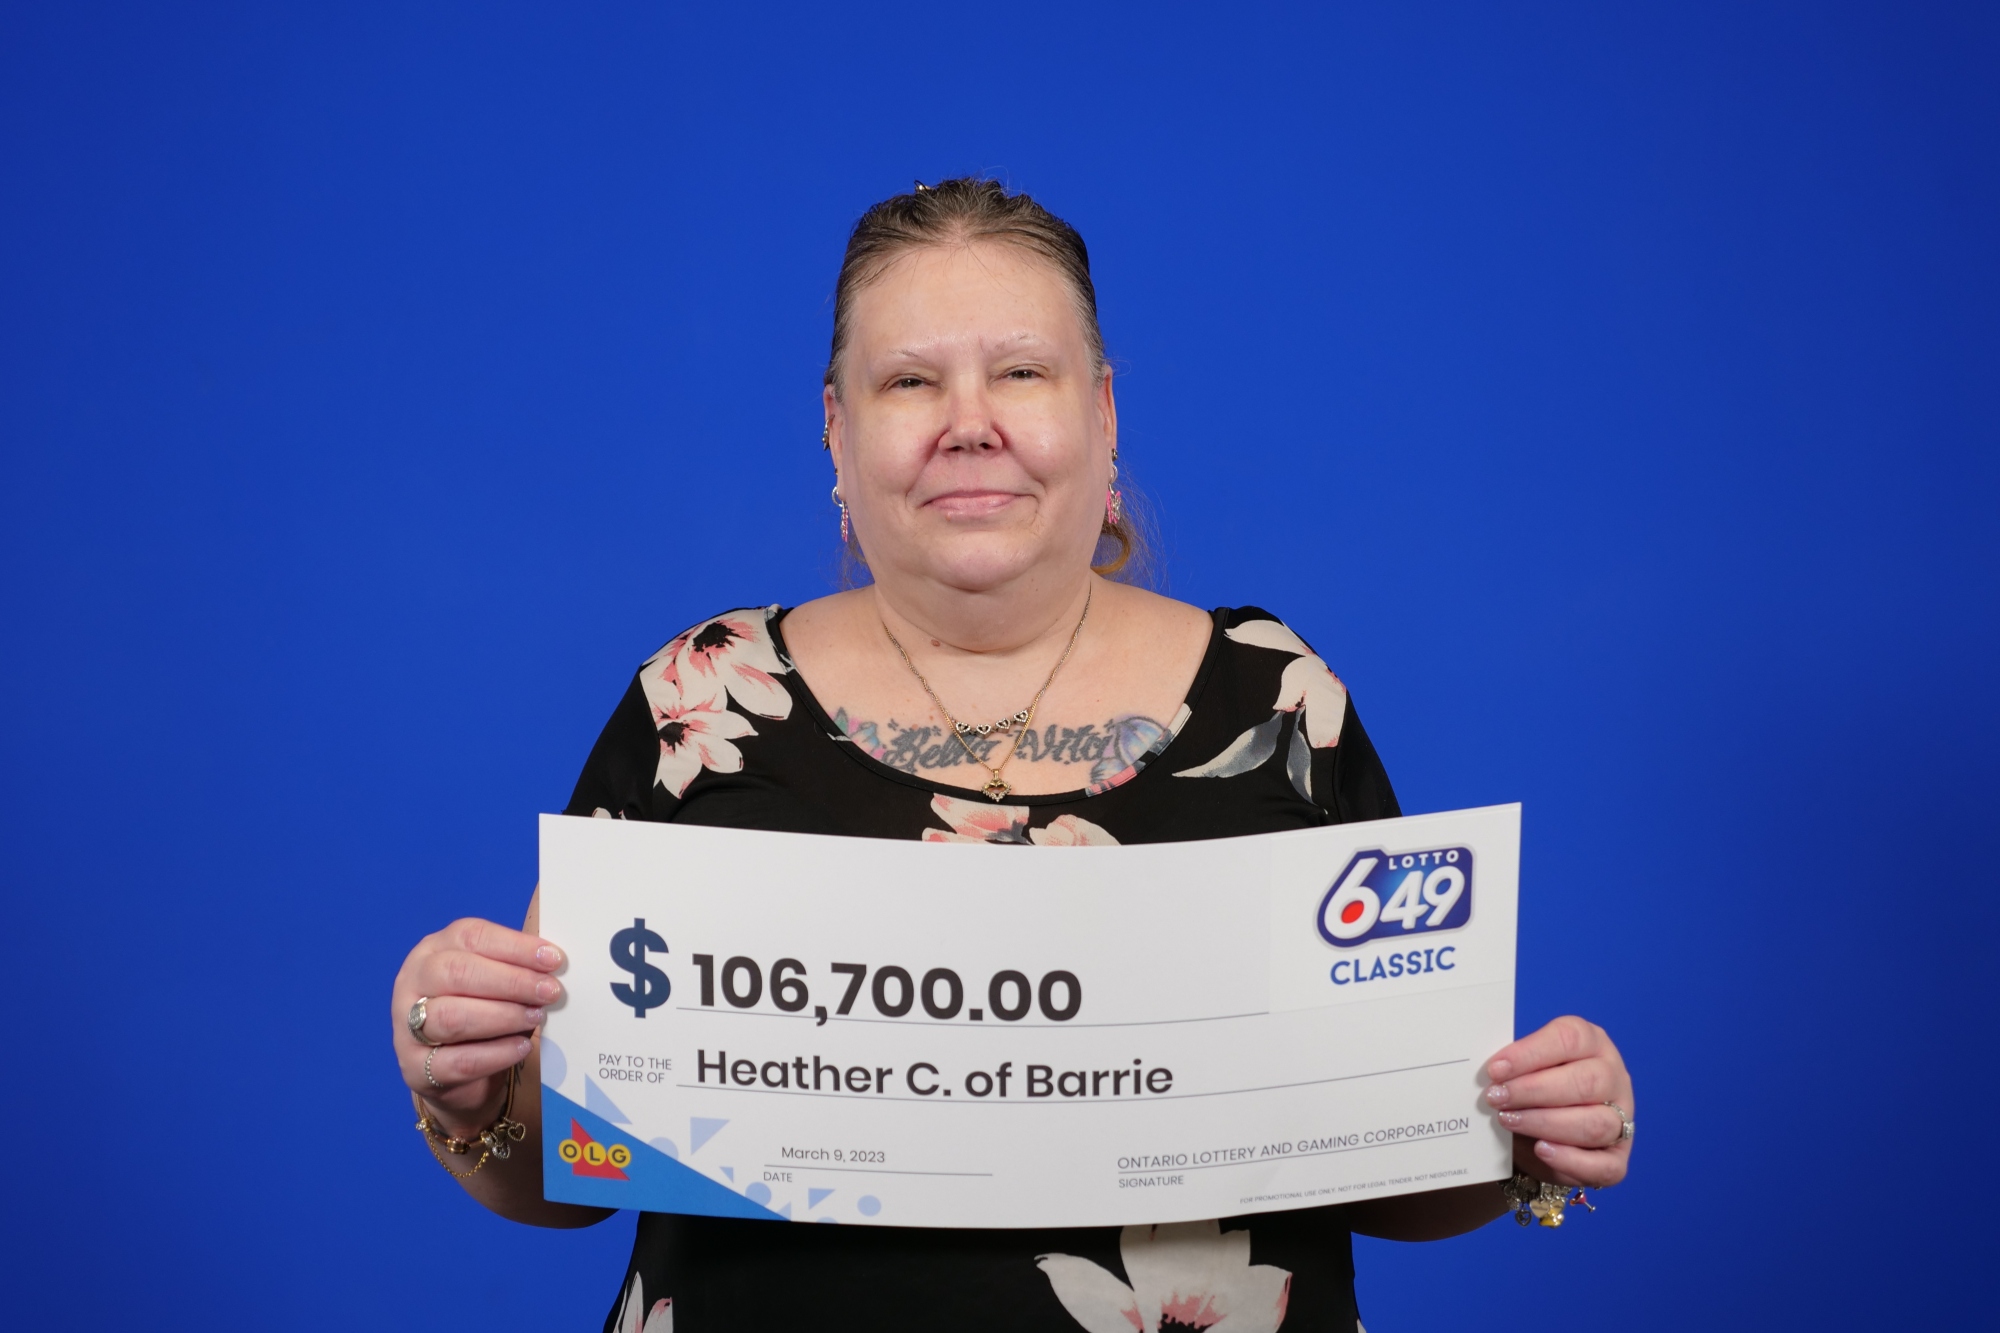 Ready to win big? Here are some OLG tips on sharing lottery tickets